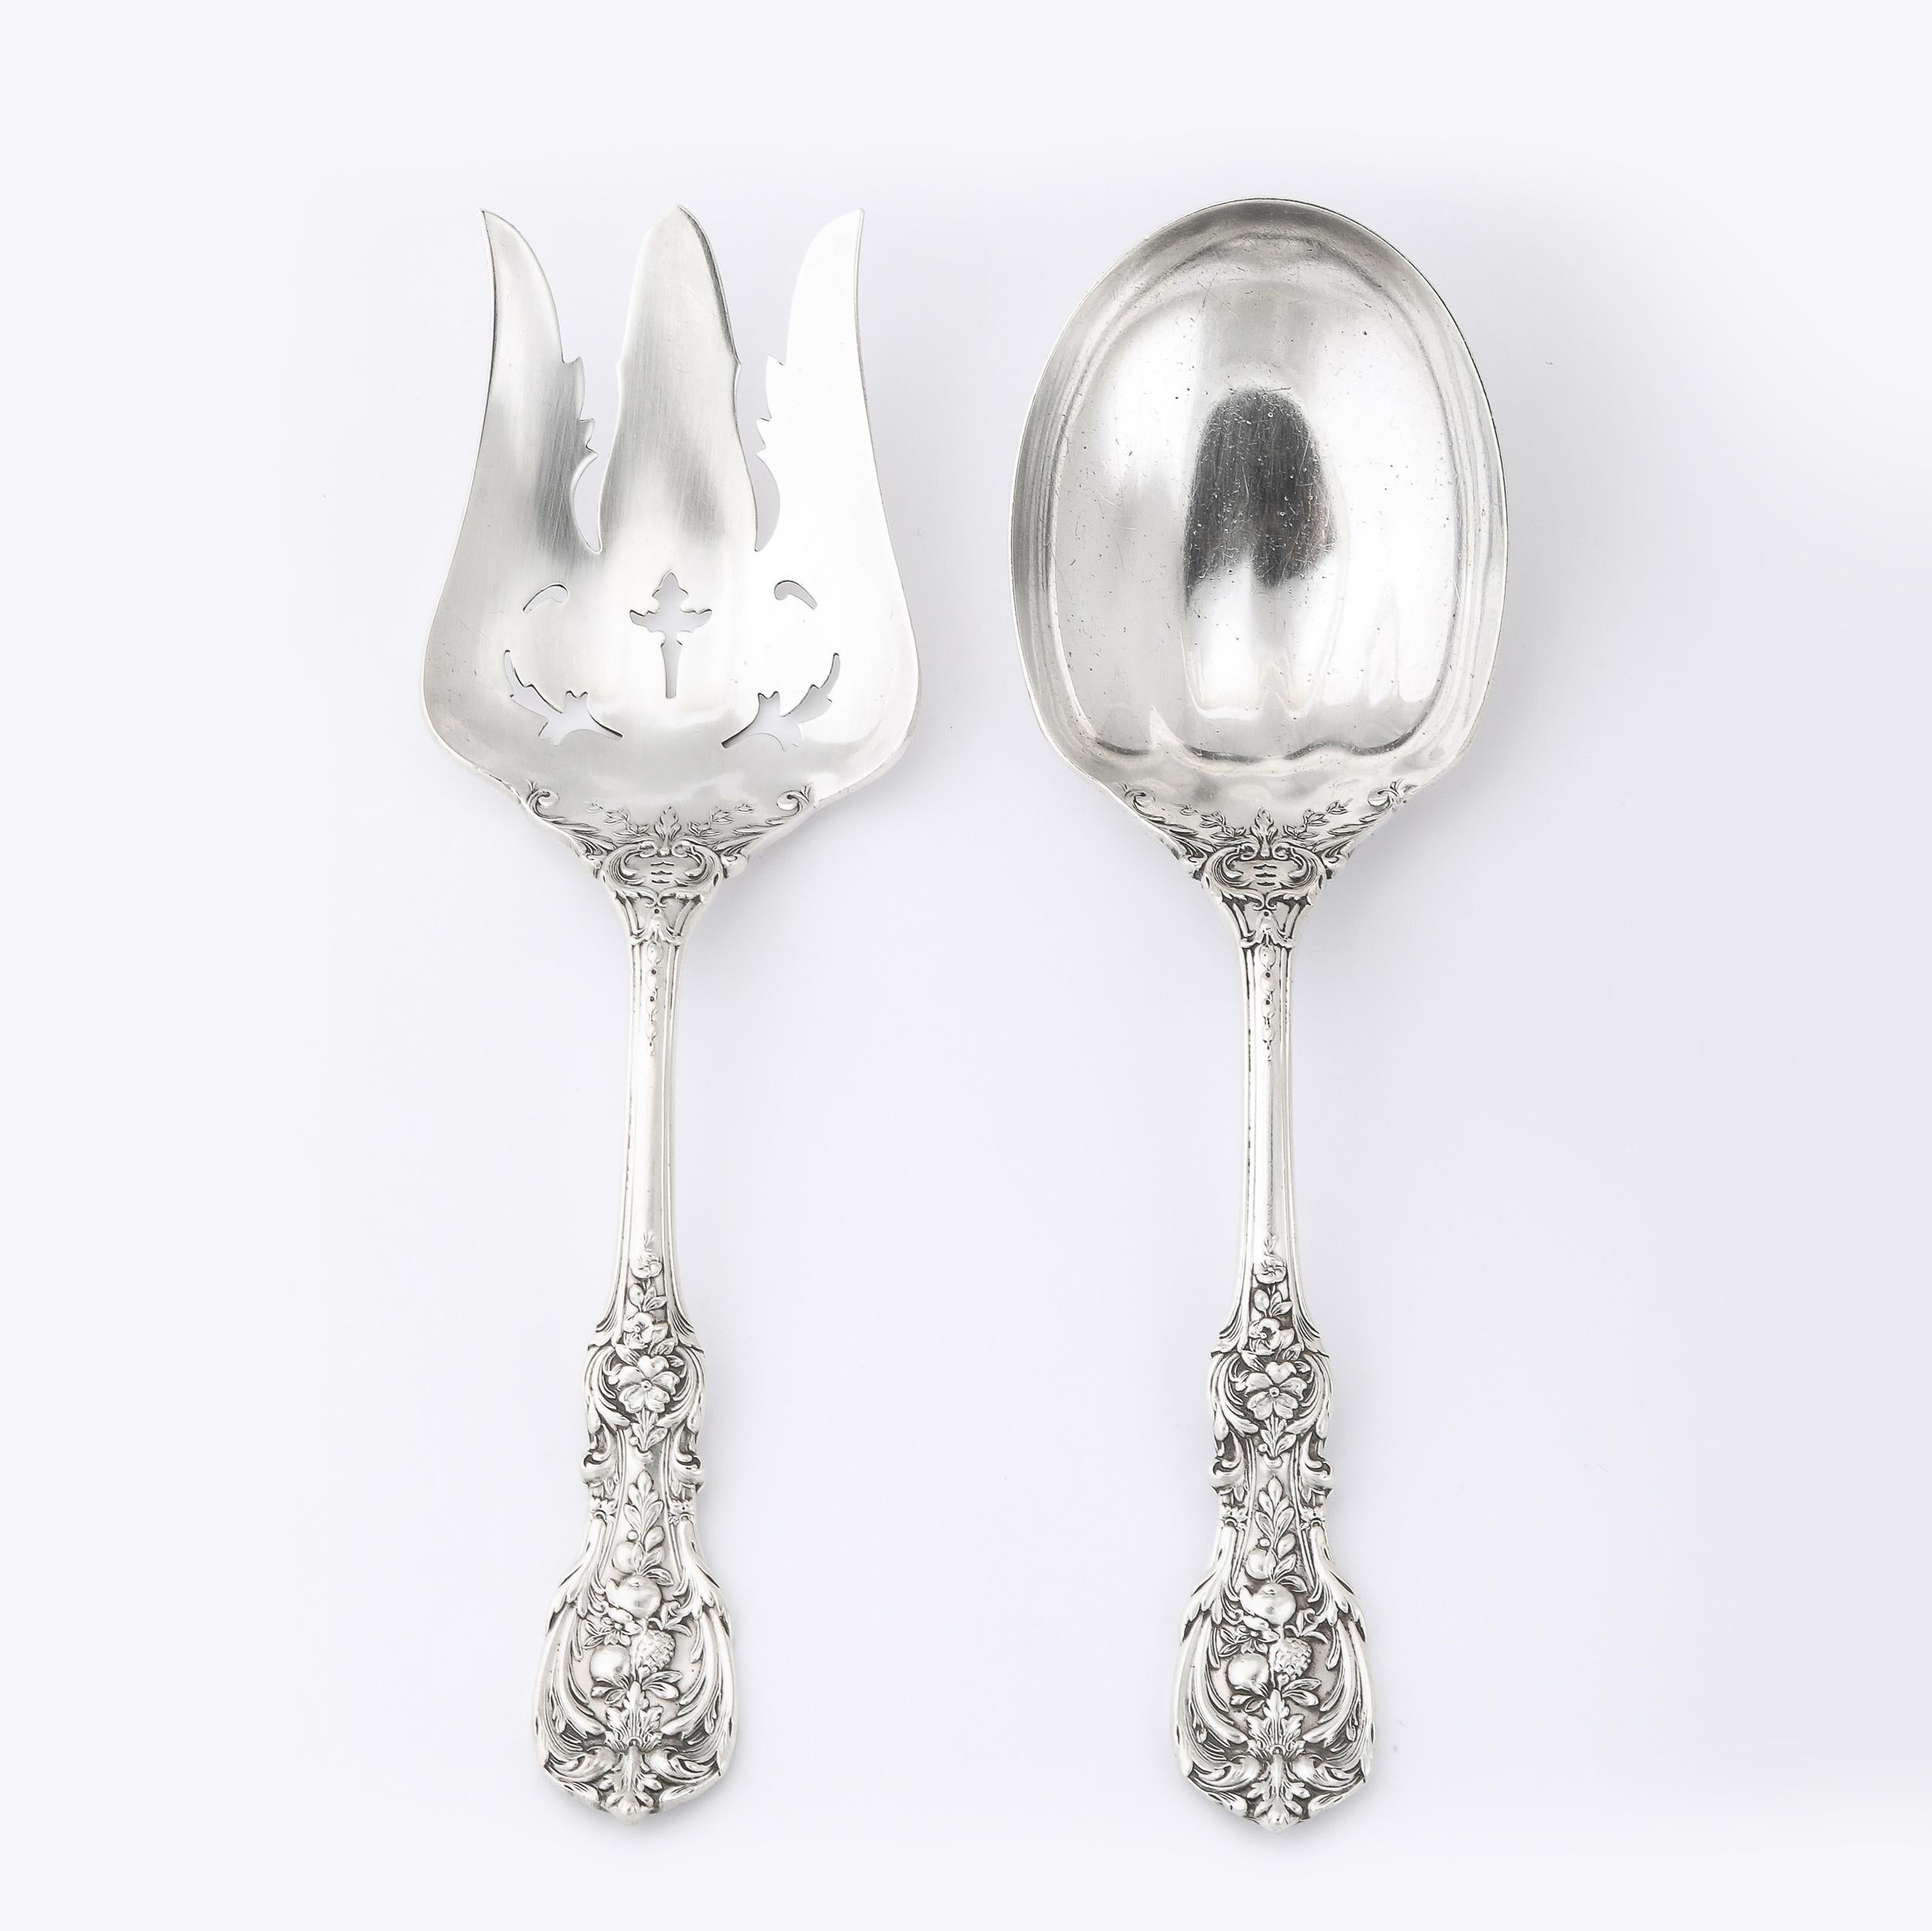 Reed and Barton Francis I Pattern Sterling Silver Serving Spoon & Fork Set  For Sale 3